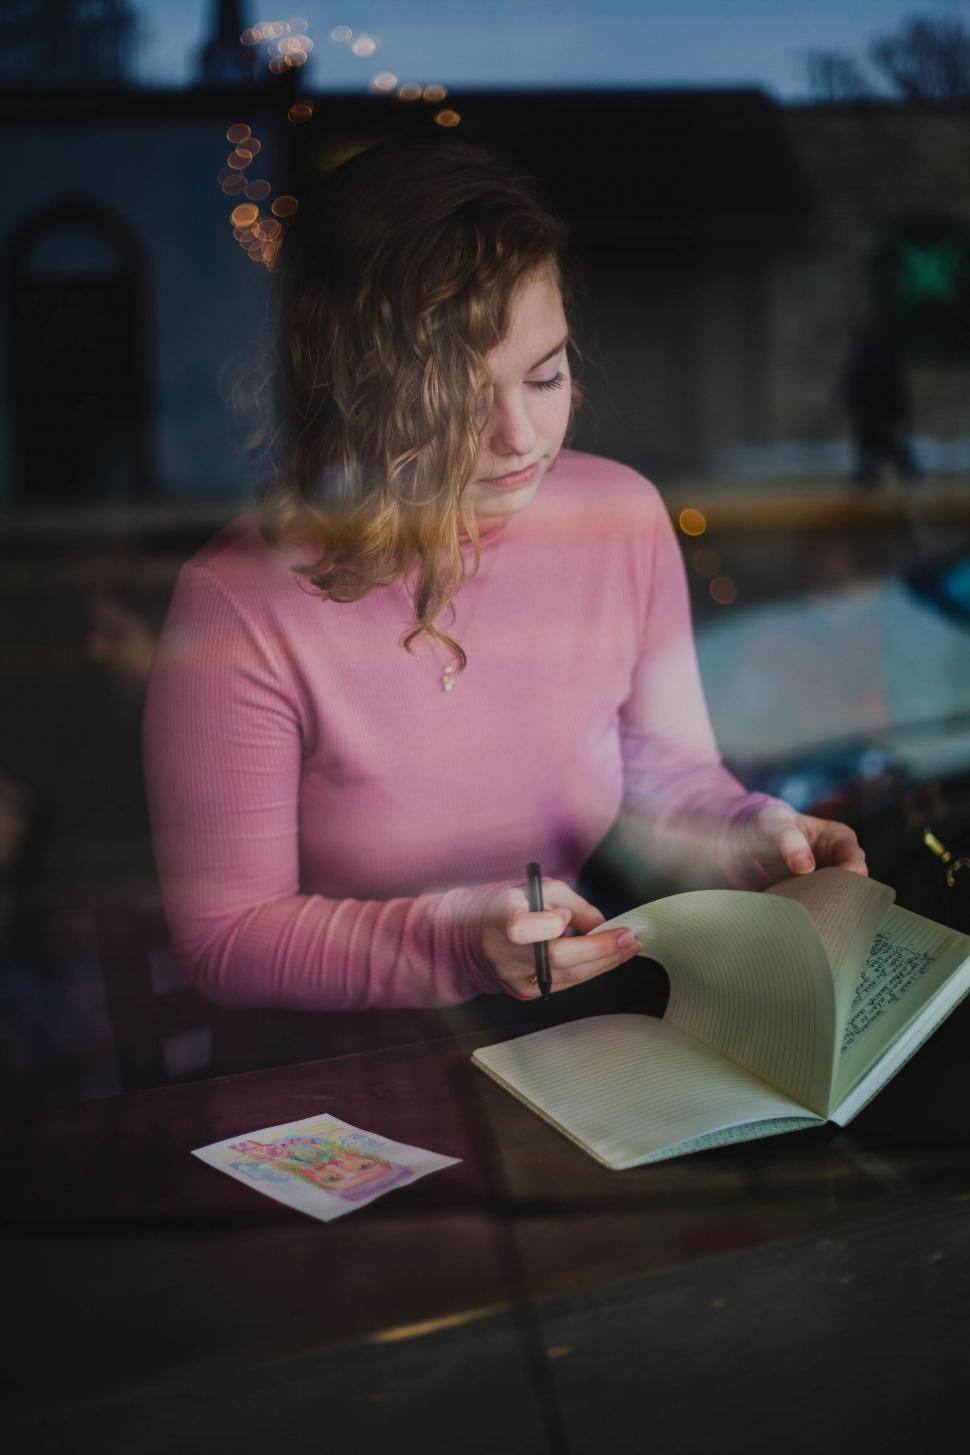 Free Image of A woman sitting at a table writing in a book 